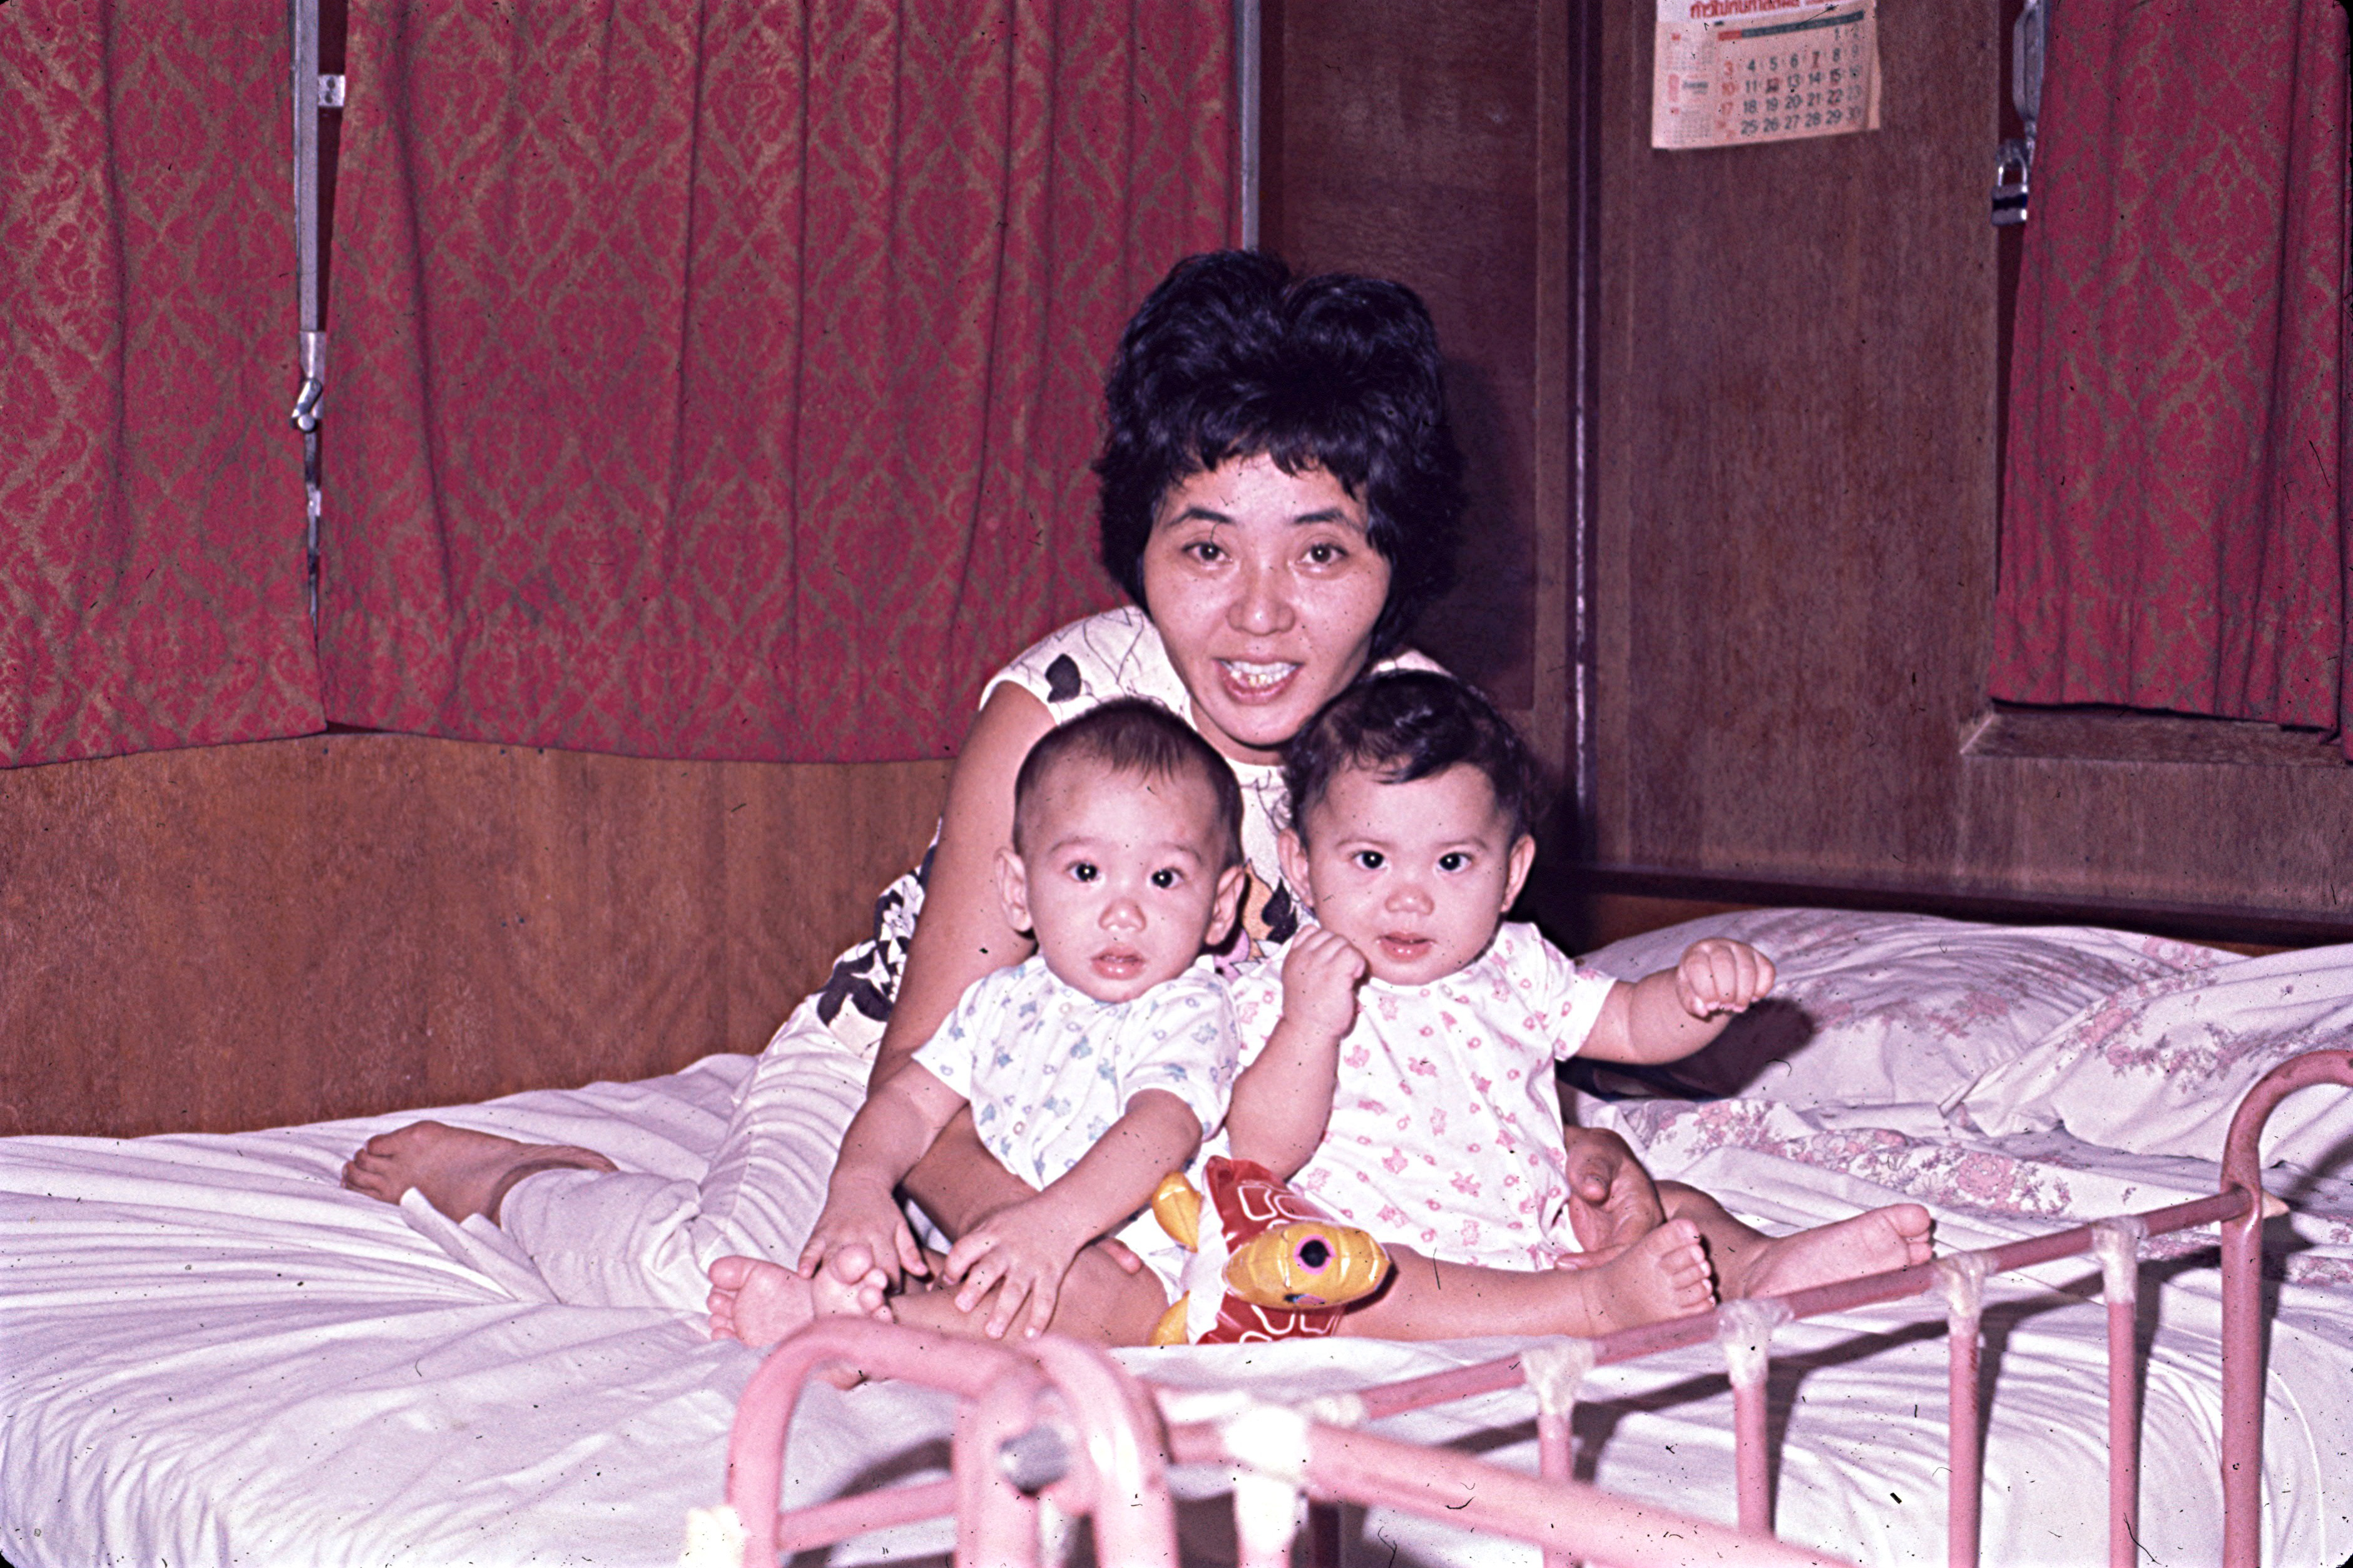 Cathy Schlund-Vials as a baby, right, with her twin brother and mother. (Courtesy of Cathy Schlund-Vials)